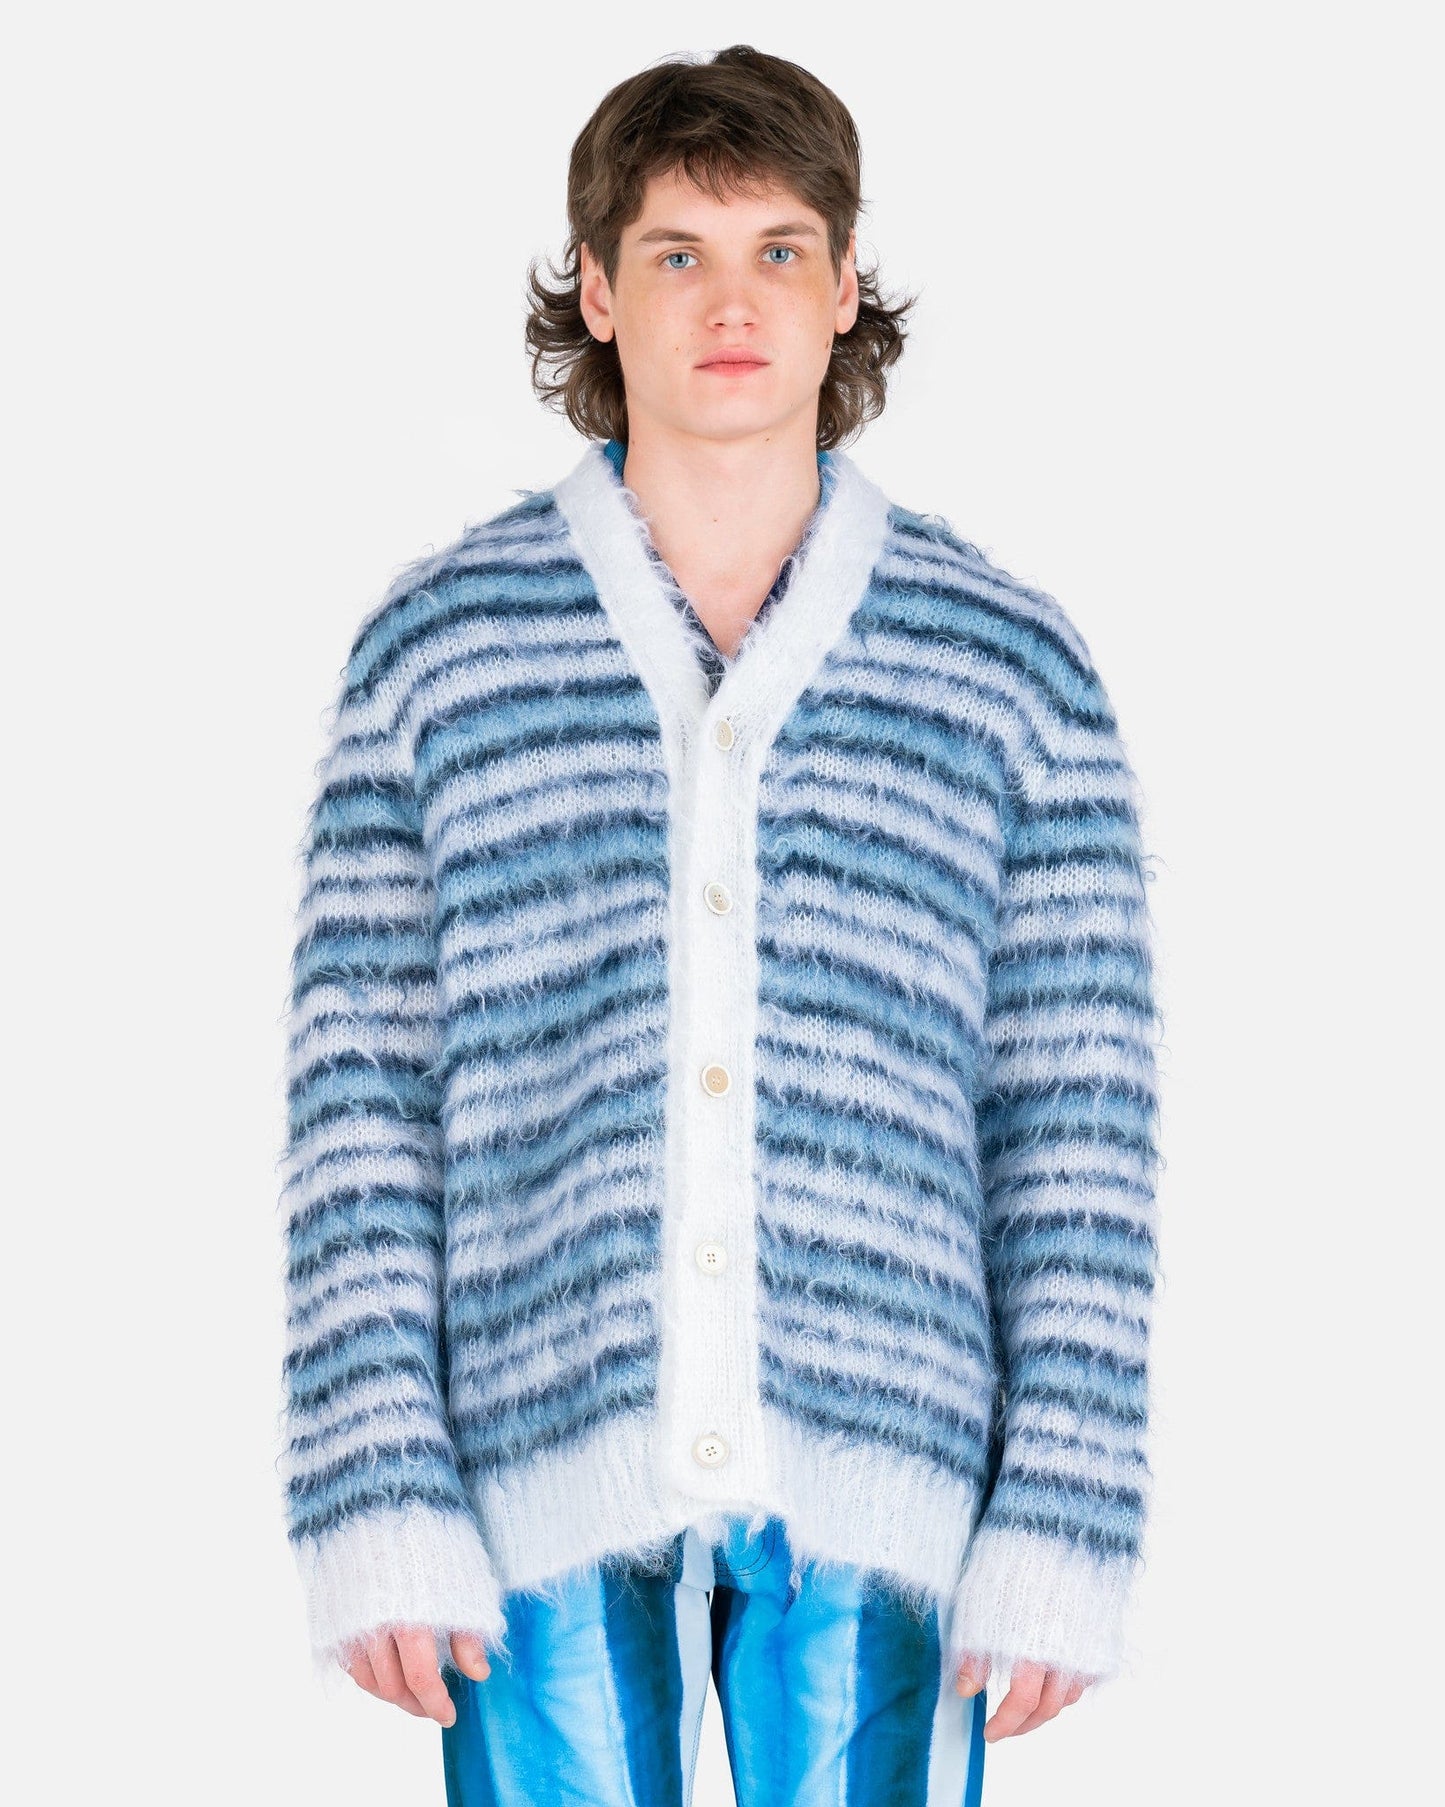 Marni Men's Sweatshirts Iconic Groovy Striped Mohair Cardigan in Lilly White